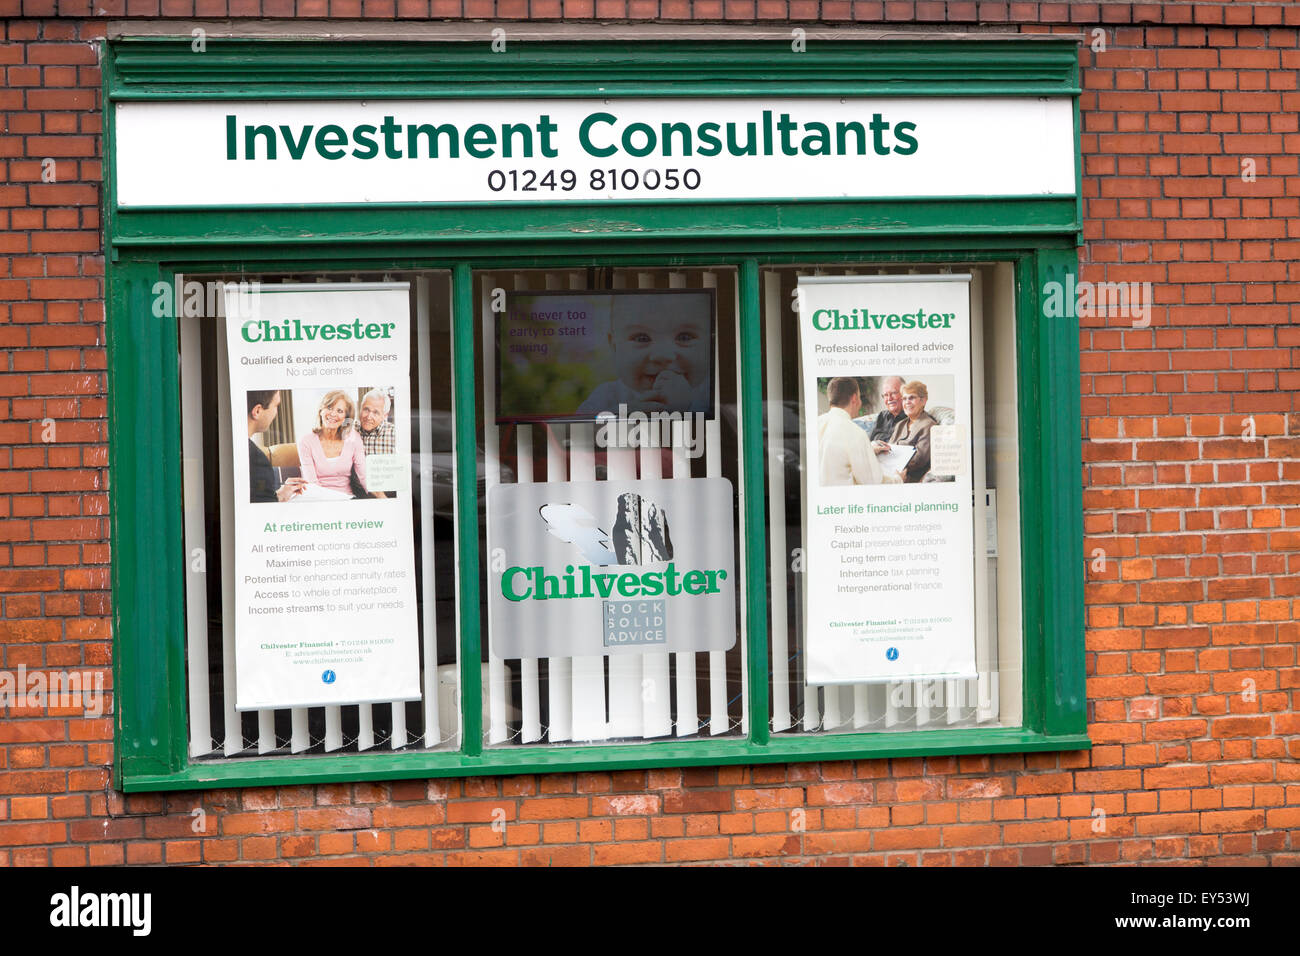 Chilvester investment consultants shop, Calne, Wiltshire, England, UK Stock Photo